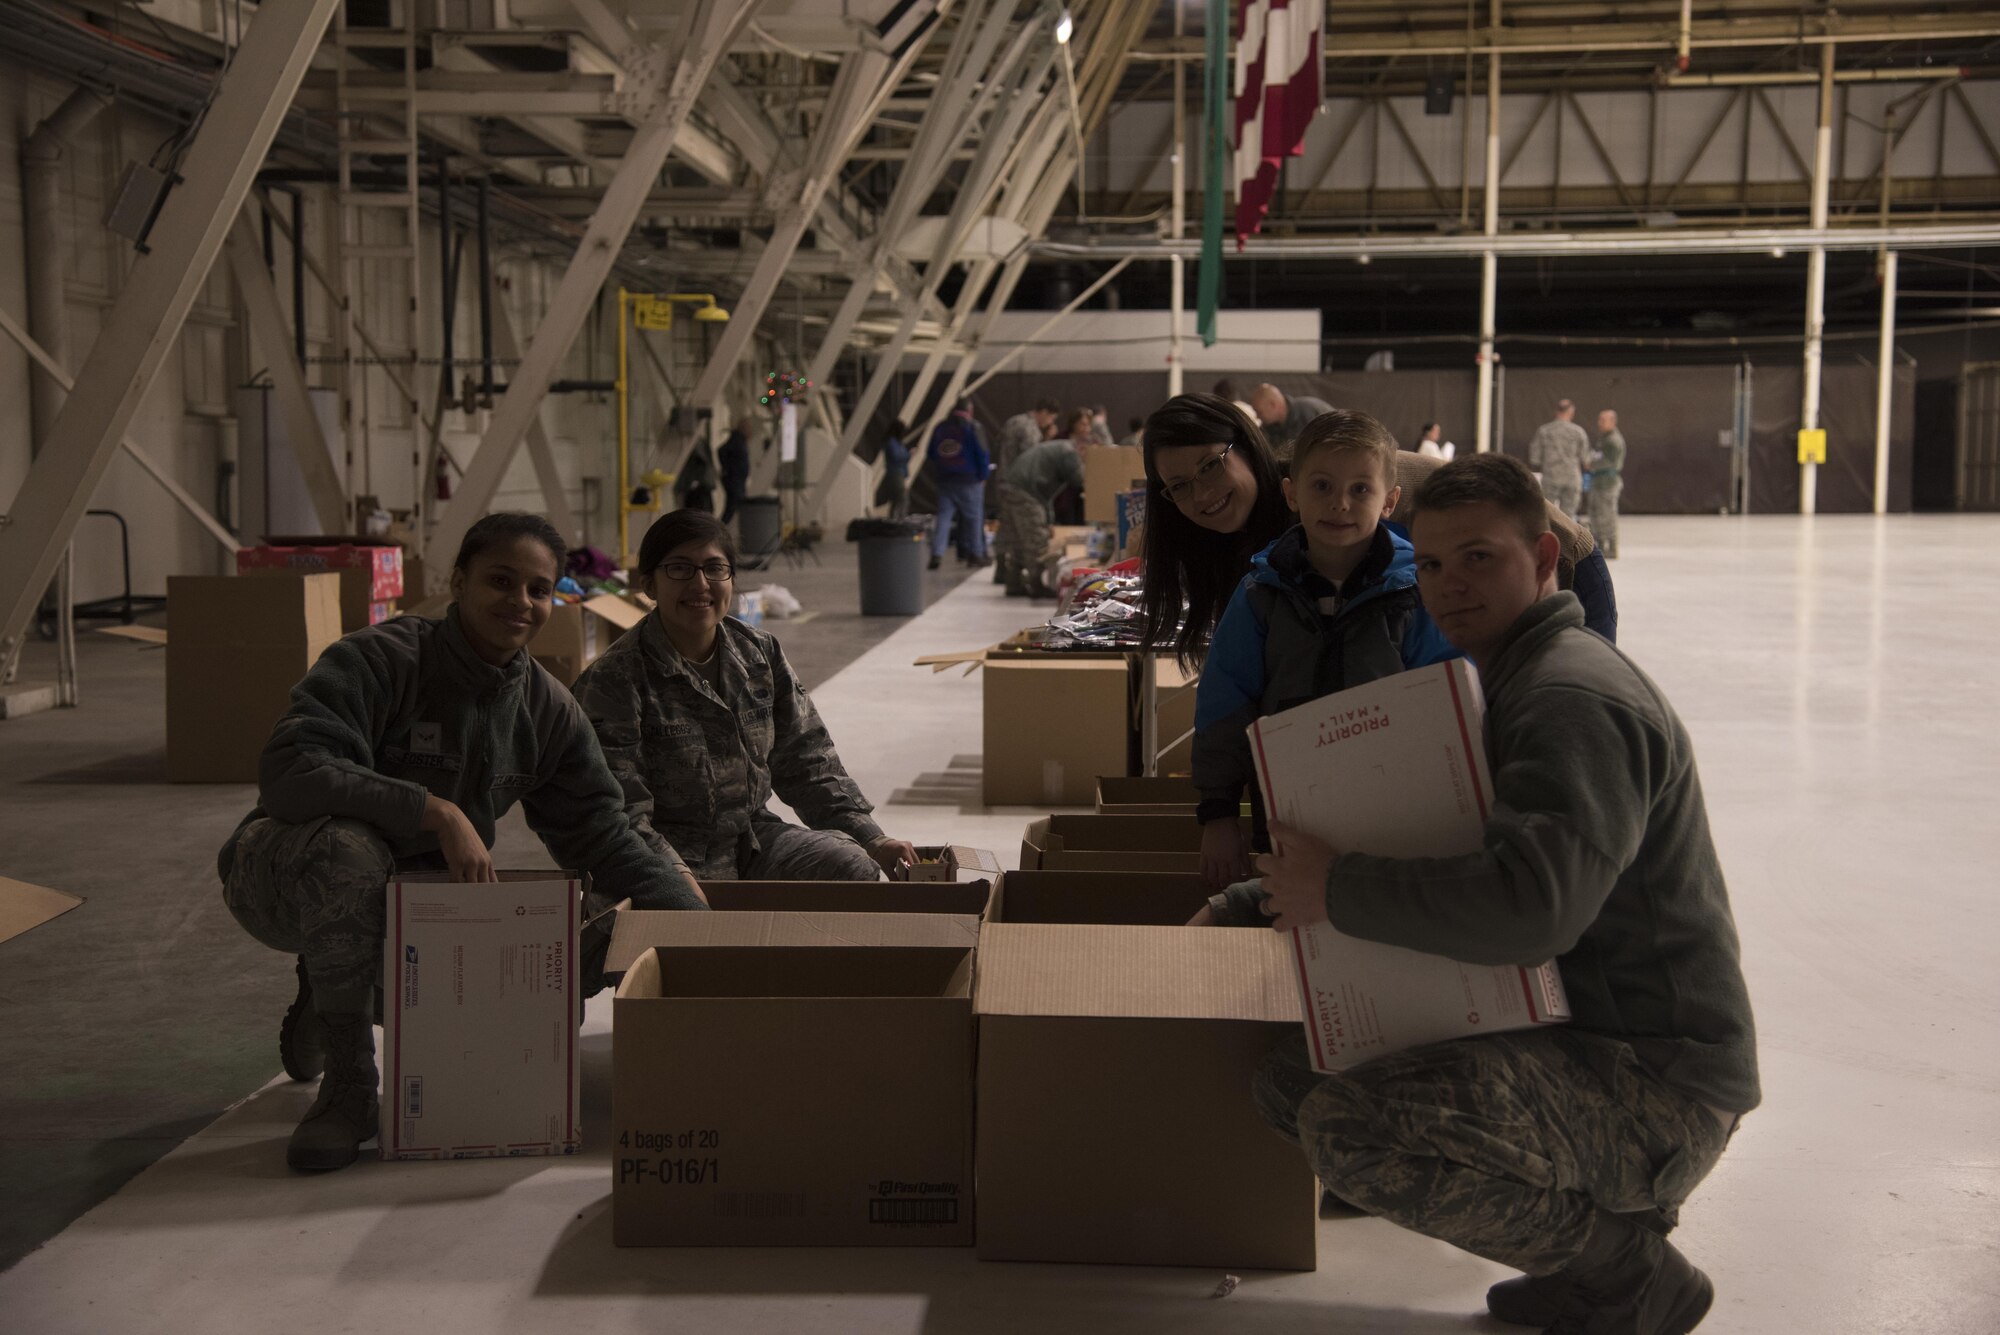 Team Fairchild volunteers pack items into care packages as part of KREM 2 News Treats 2 Troops program Dec. 1, 2016 at Fairchild Air Force Base. Volunteers packaged more than 400 boxes that will be delivered to deployed military members. The boxes are filled with various items, such as hot sauce, wet wipes, beef jerky, toothbrushes, and magazines. (U.S. Air Force photo/Senior Airman Nick J. Daniello)